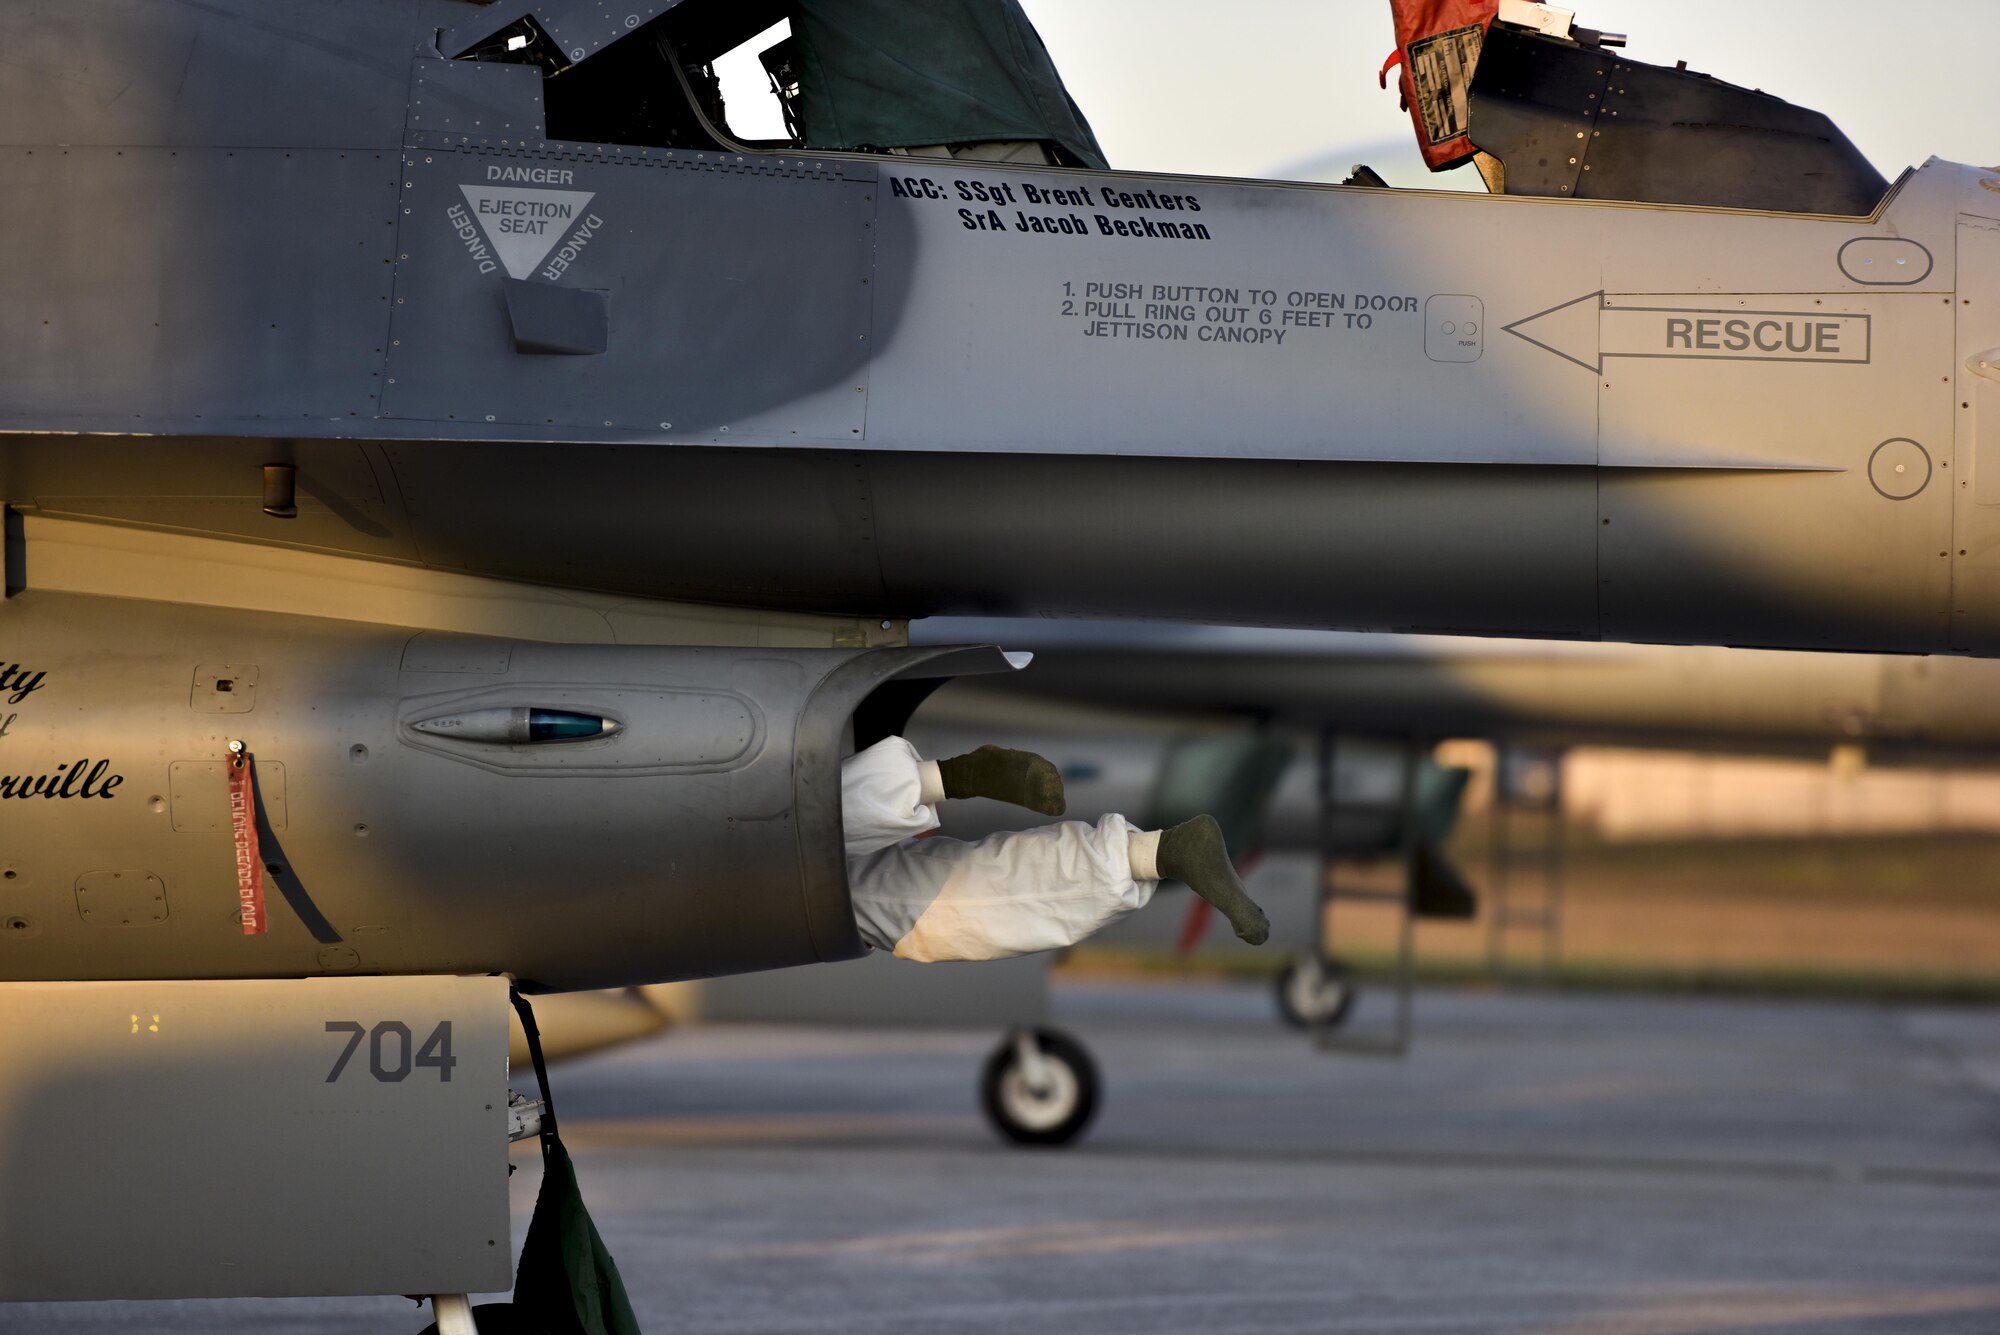 An F-16 crew chief assigned to the 180th Fighter Wing, Ohio Air National Guard, squeezes in to the intake on an F-16 Fighting Falcon in the early morning for a pre-flight check during a training exercise at MacDill Air Force Base in Tampa, Florida on Feb. 2, 2017. The 180th brought their F-16s and approximately 150 maintainers, pilots, and operations specialists to MacDill AFB for a two week training exercise which included basic fighter maneuvers against F-18 Hornets from the Canadian 425th Tactical Fighter Squadron, sharpening the combat capabilities of the OANG Airmen. (Air National Guard photo by Tech. Sgt. Nic Kuetemeyer)